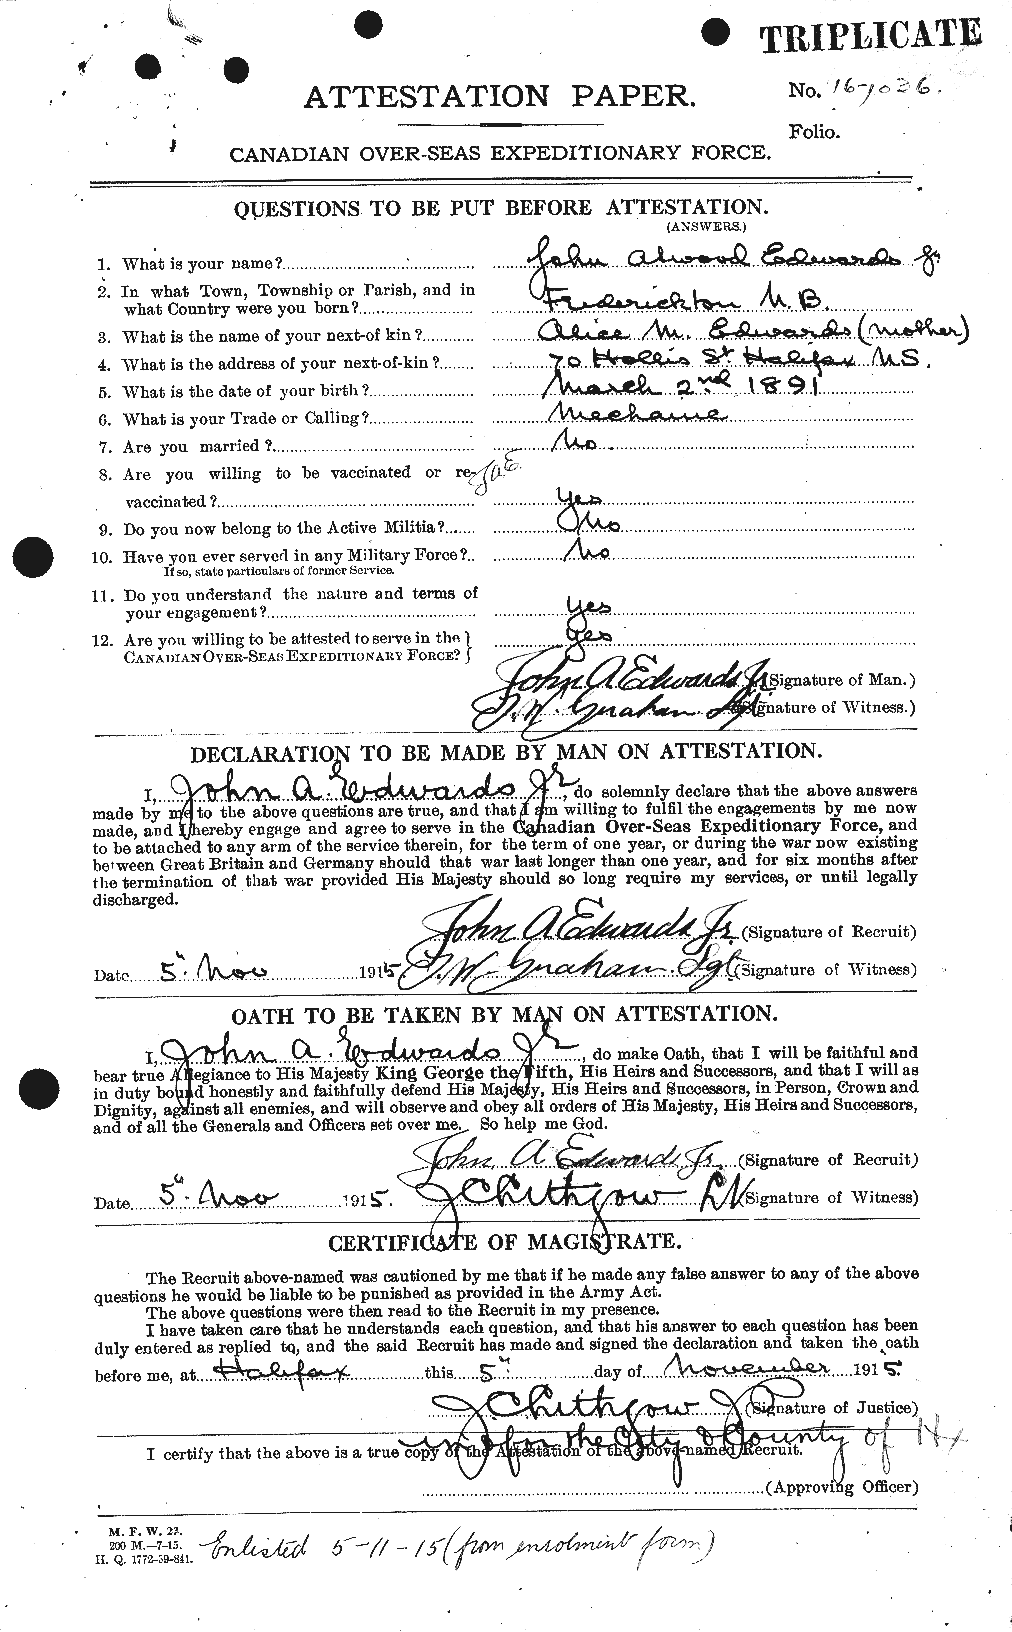 Personnel Records of the First World War - CEF 310120a